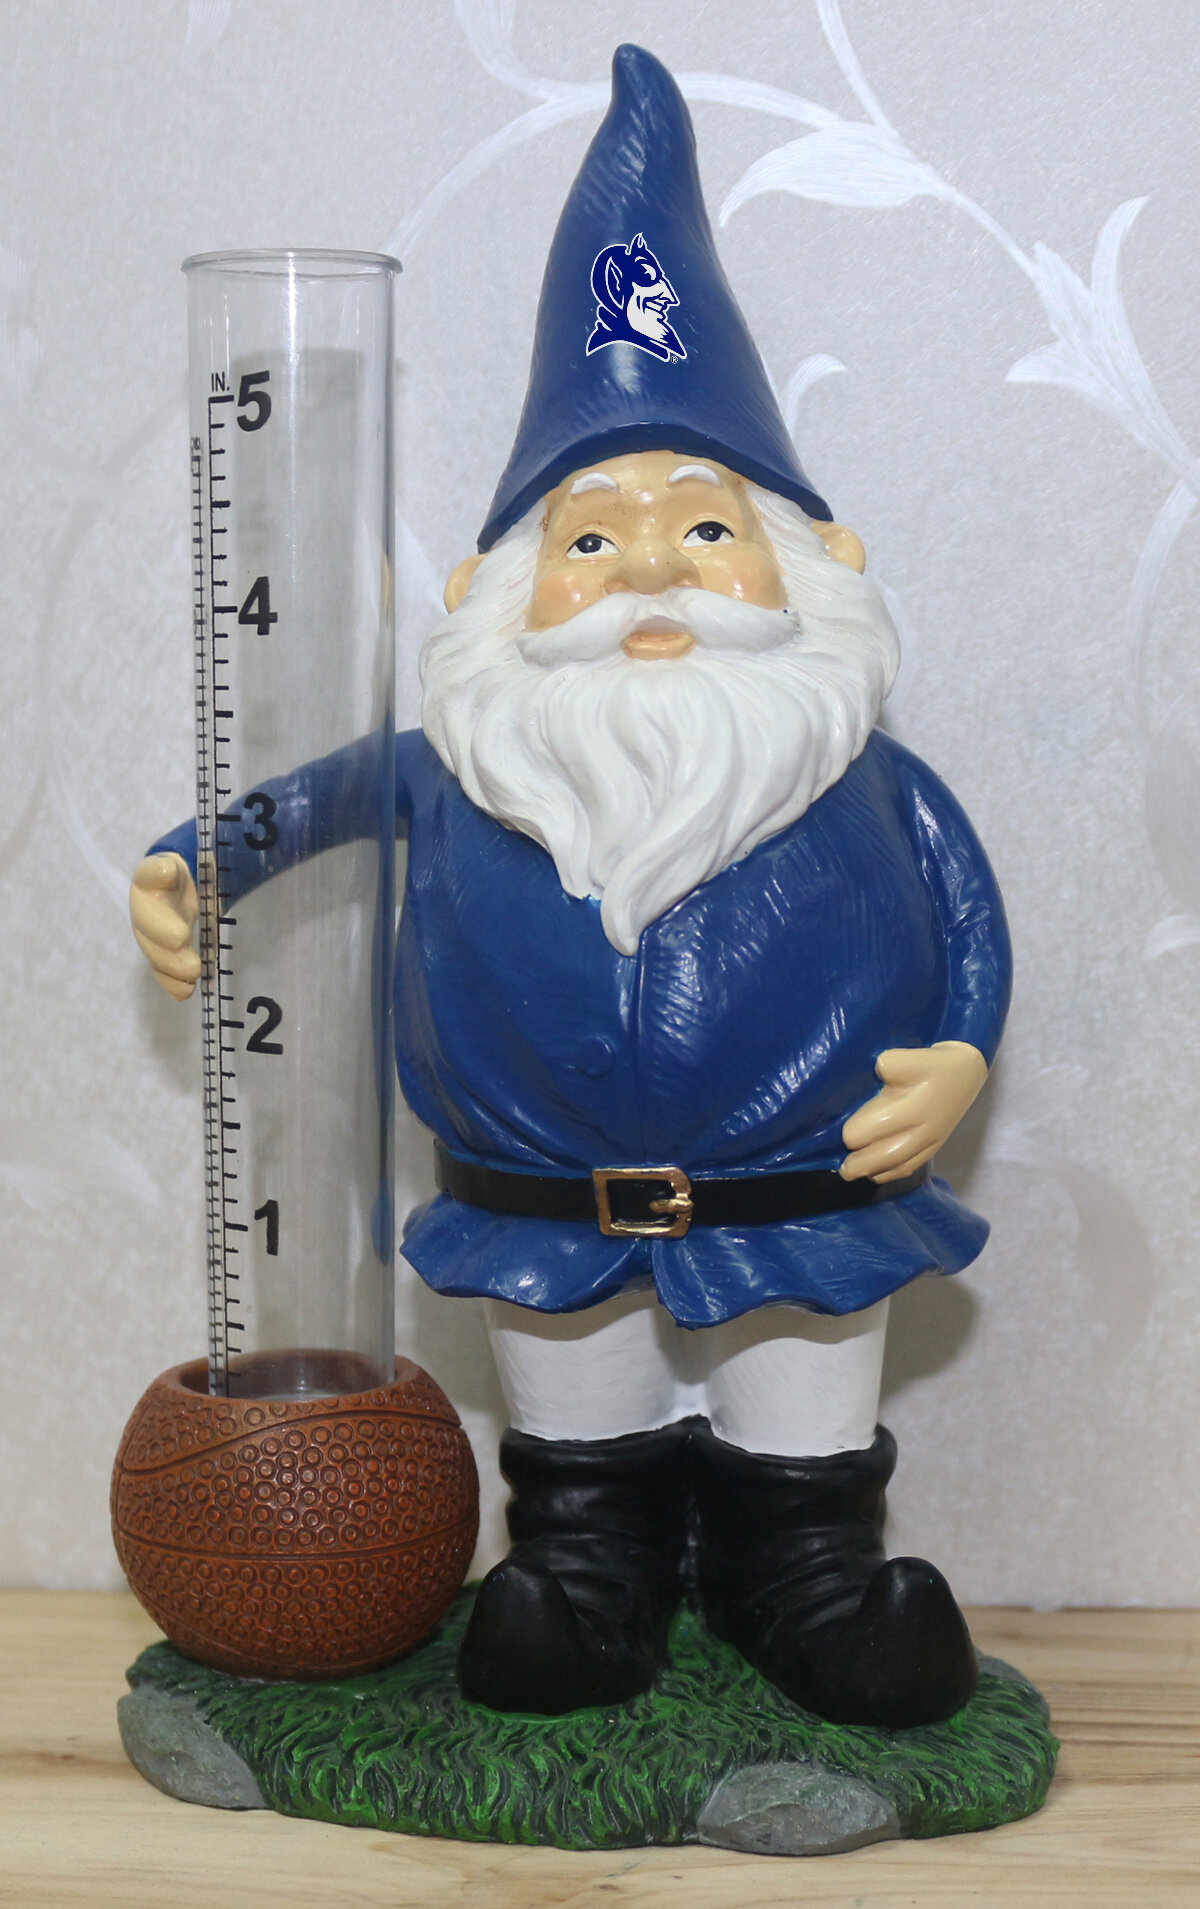 wirlsweal Gnome Rain Gauge for Yard,Rain Gauge with Stake and Replacement Glass Tube,Gnome Decorations Outdoor with Rain Gauge for Garden Patio Lawn Multicolor